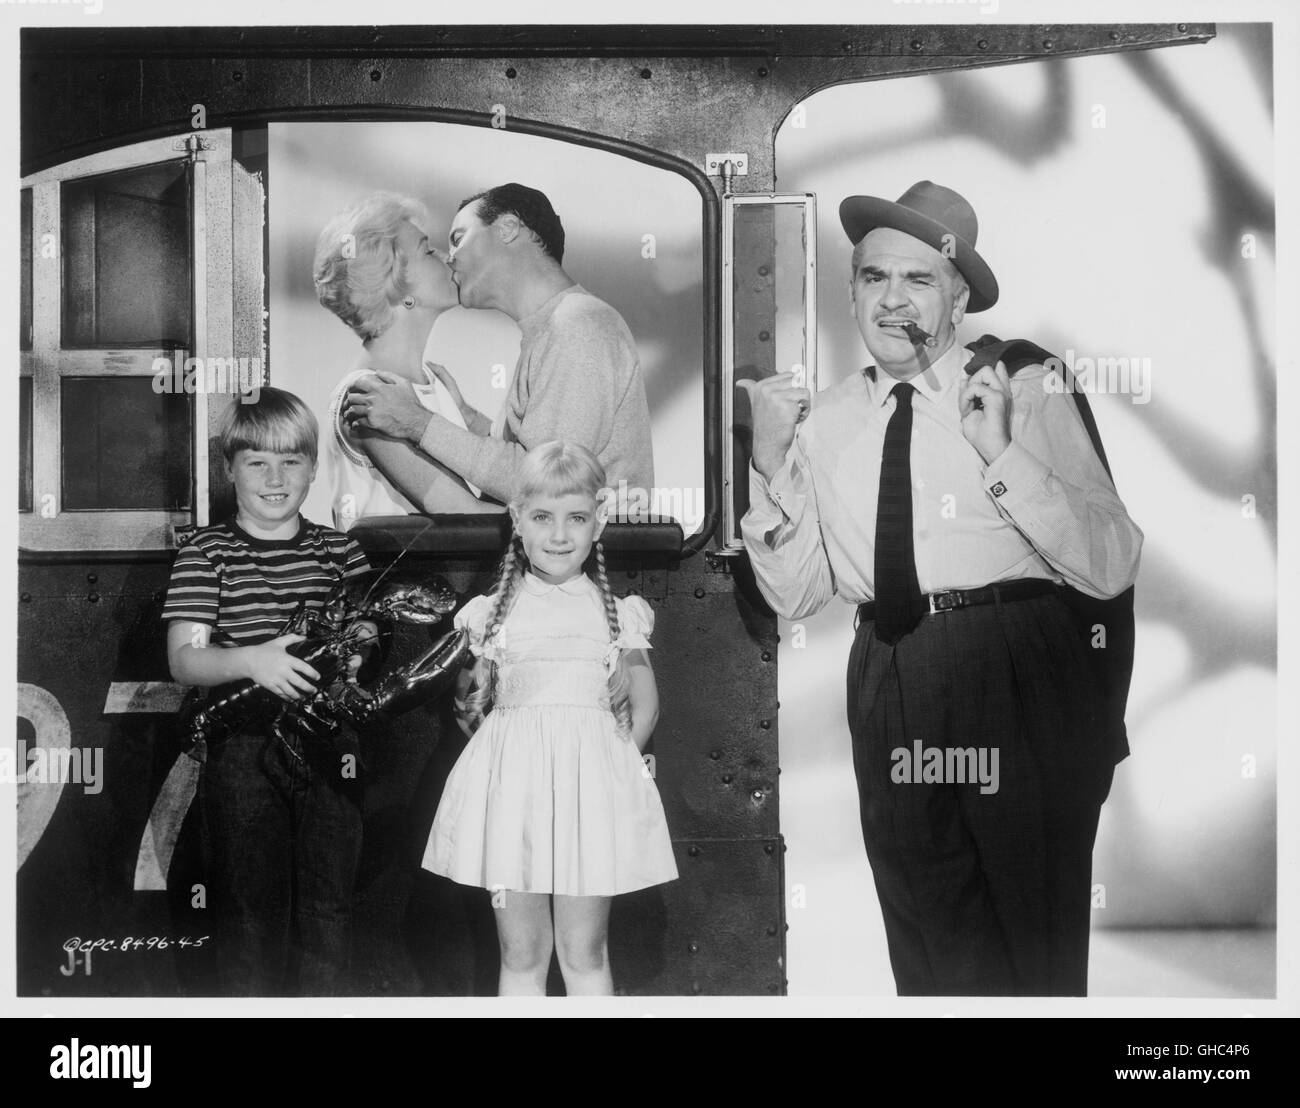 IT HAPPENED TO JANE USA 1959 Richard Quine Jane Osgood (DORIS DAY), George Denham (JACK LEMMON) as kissing couple, the children Billy and Betty Osgood (TEDDY ROONEY, GINA GILLESPIE) and Harry Foster Malone with cigar (ERNIE KOVACS) Regie: Richard Quine Stock Photo